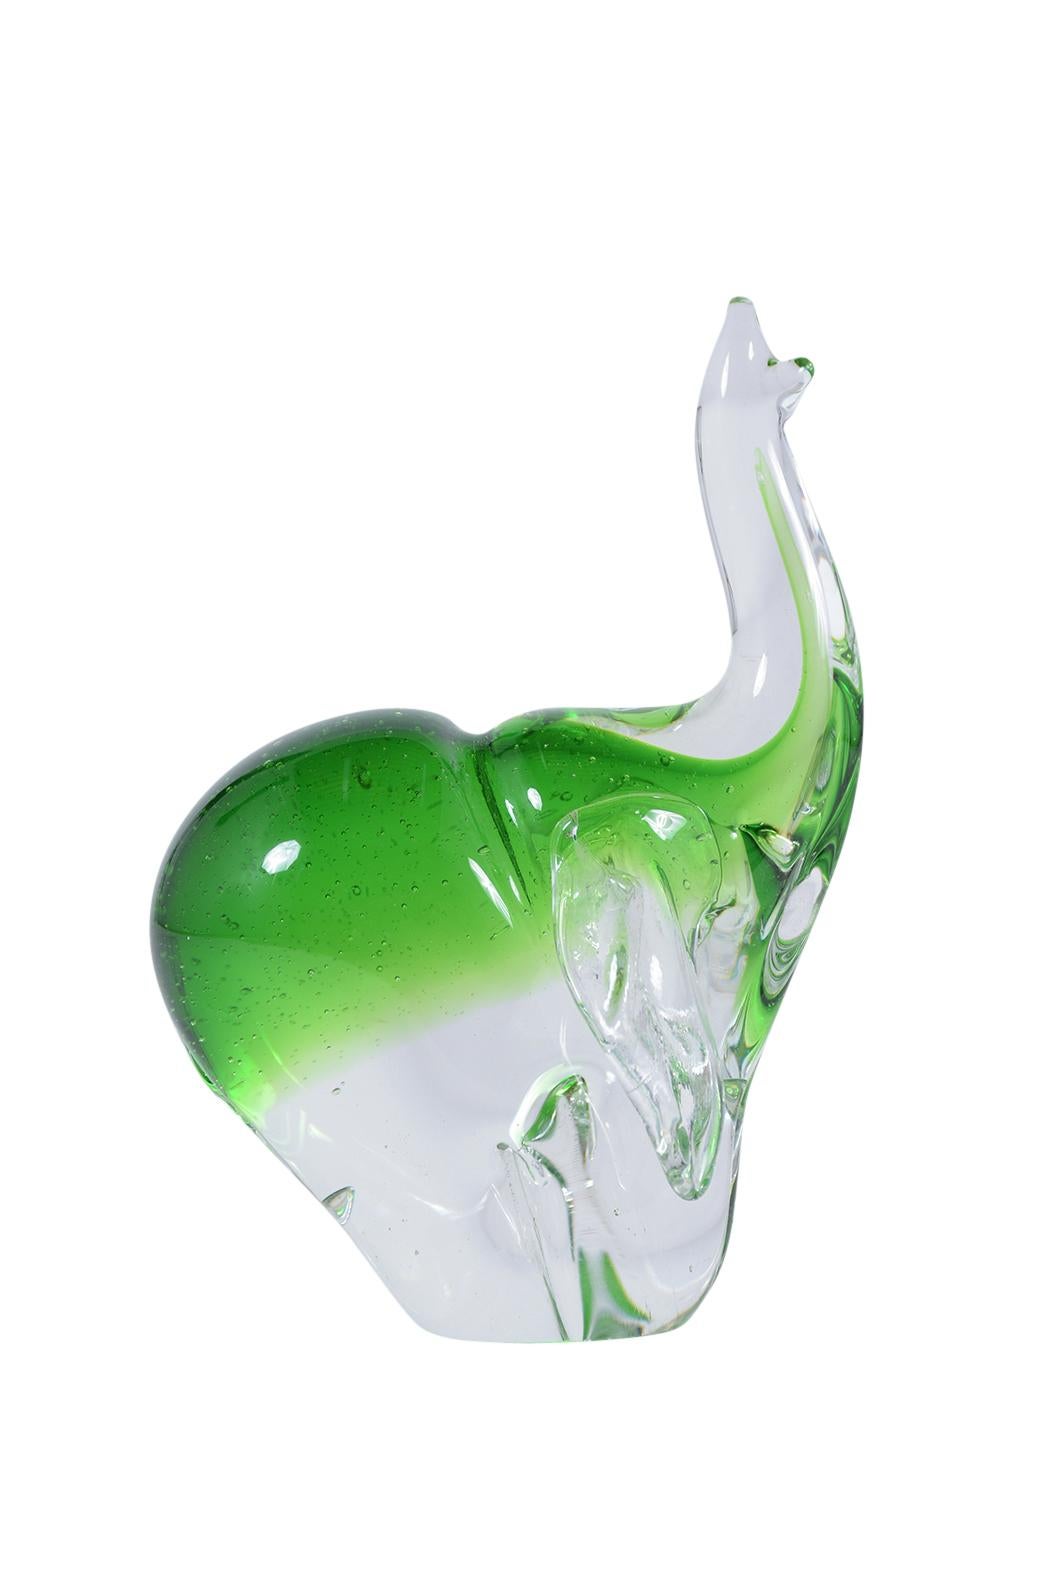 This 1960's Italian sculpture hand-crafted out of Murano glass depicting an elephant in a clear and green color combination. This sculpture is in great condition and has no scratches or chips. This piece is a perfect addition for a home or office